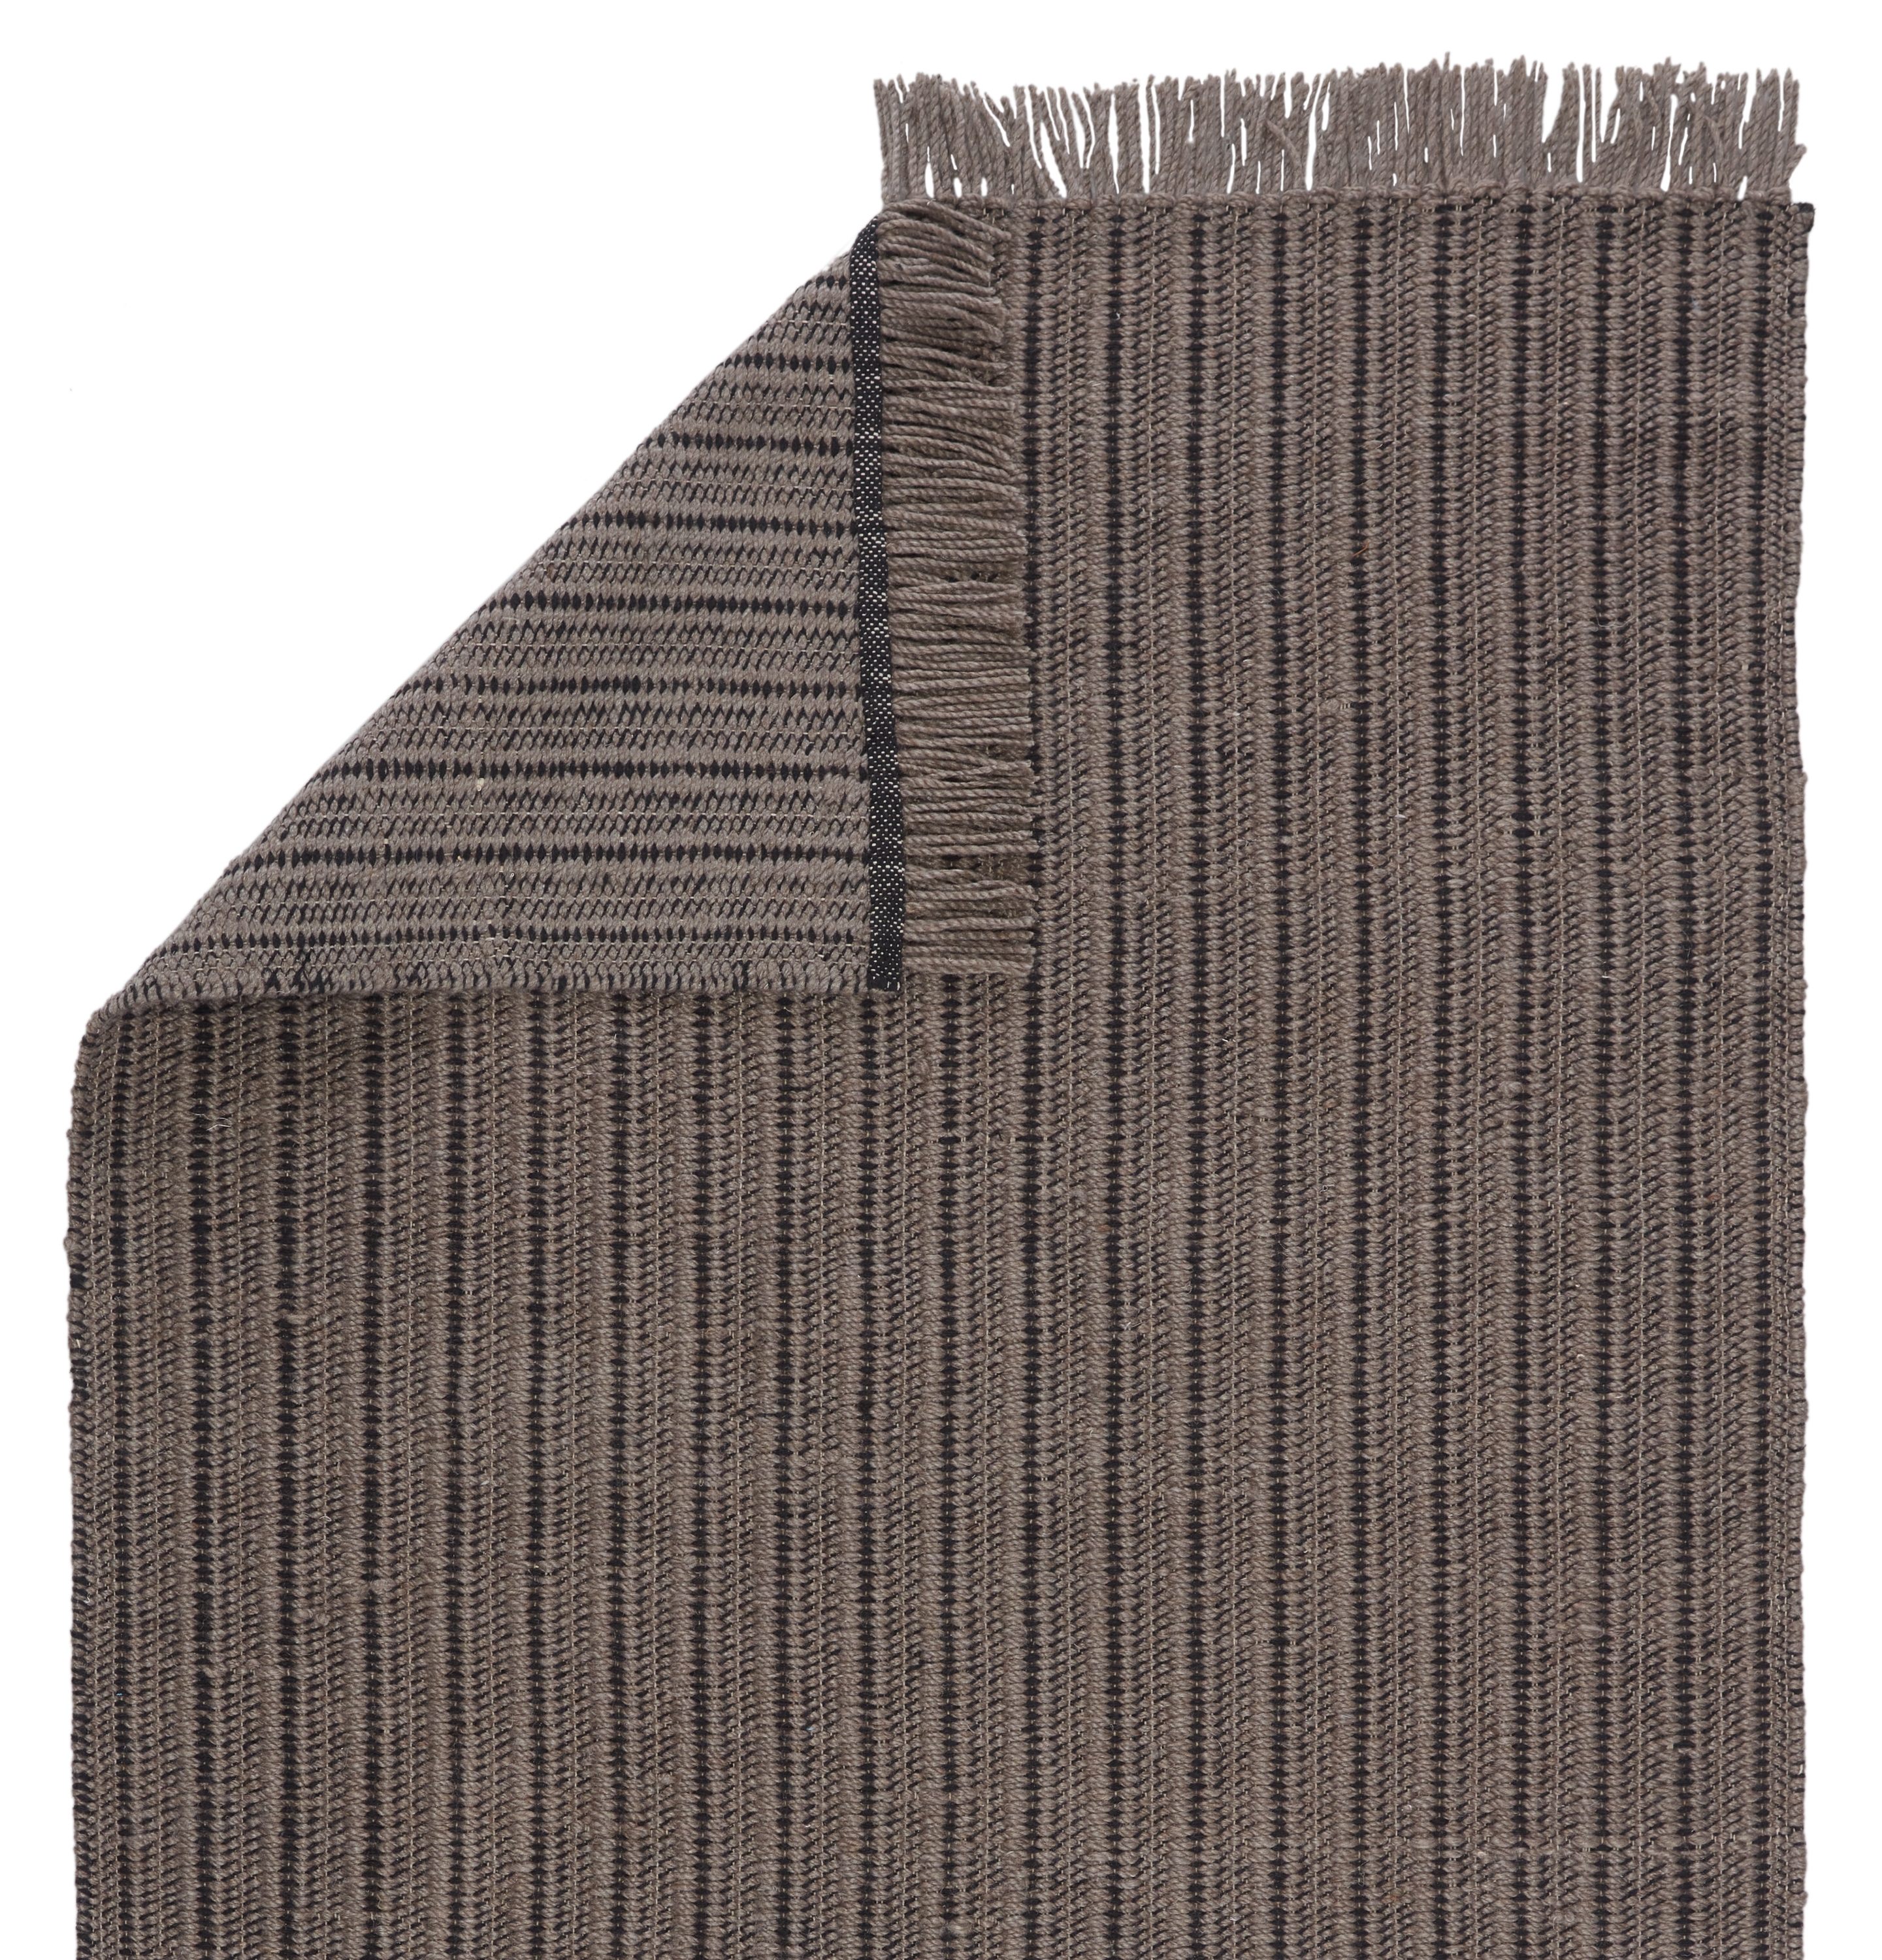 Poise Handwoven Solid Gray/ Black Area Rug (8'X10') - Image 2